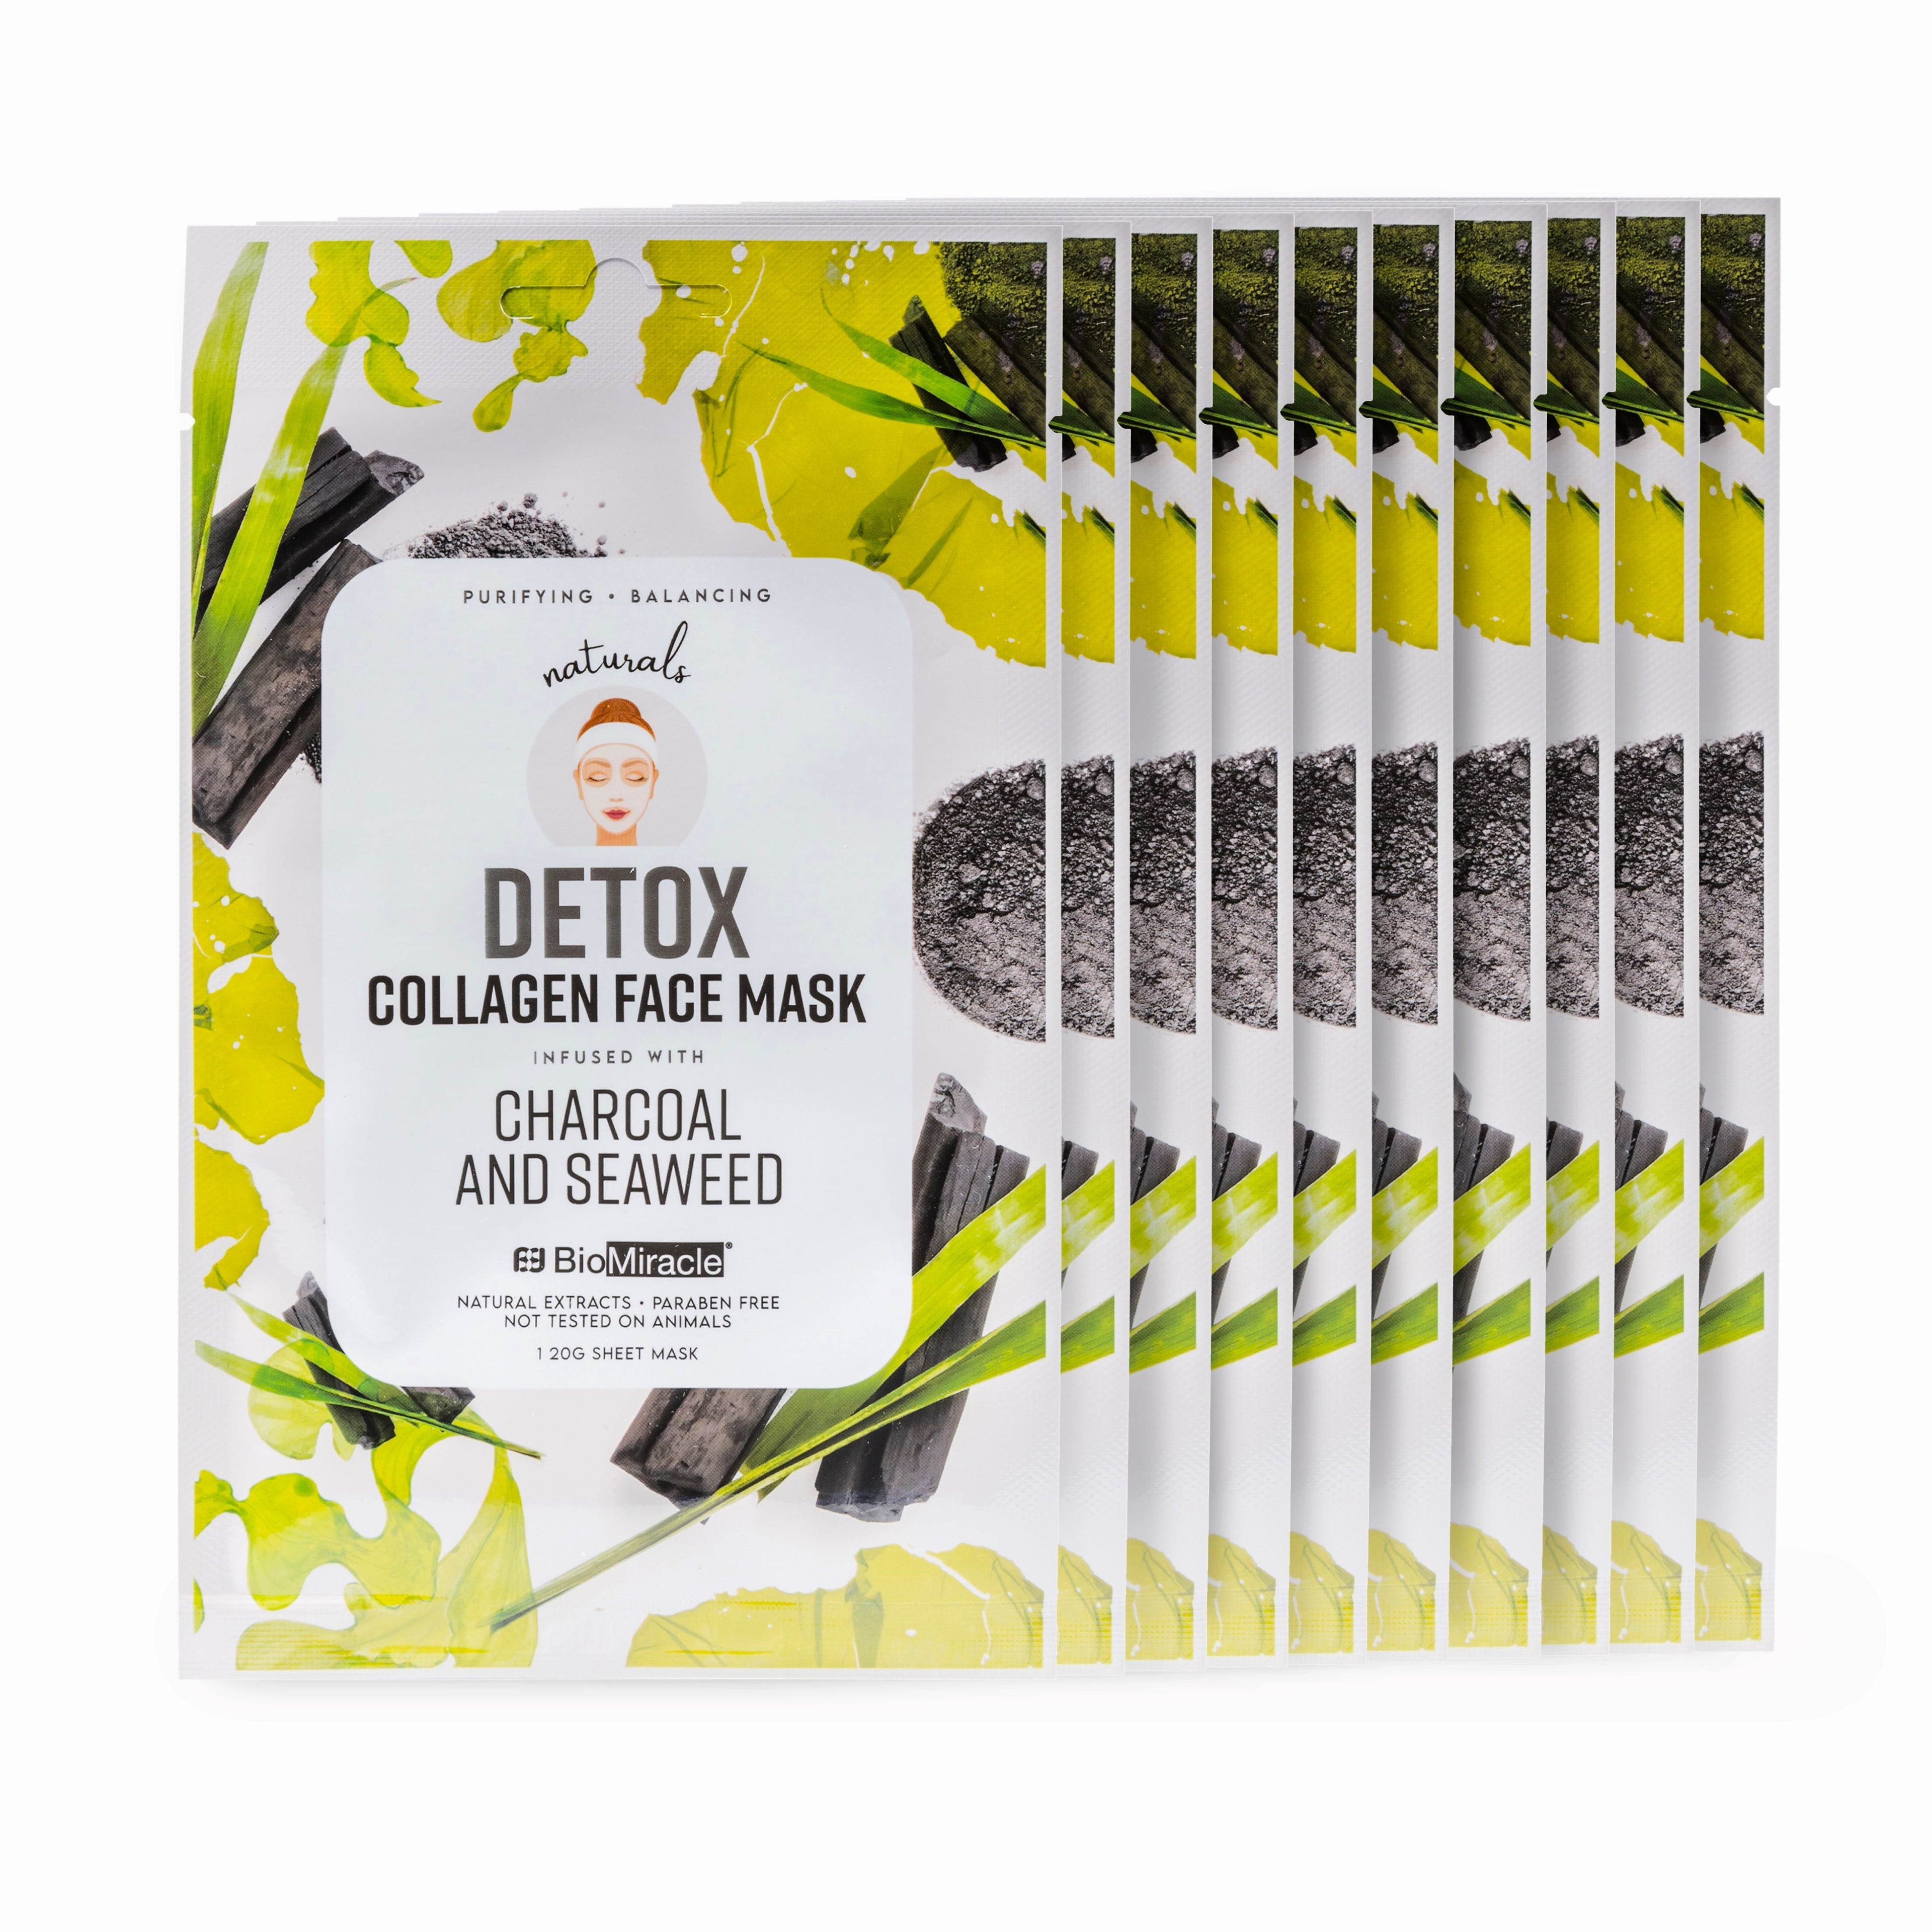 Detox Collagen Face Mask Infused with Charcoal and Seaweed-10 Pack